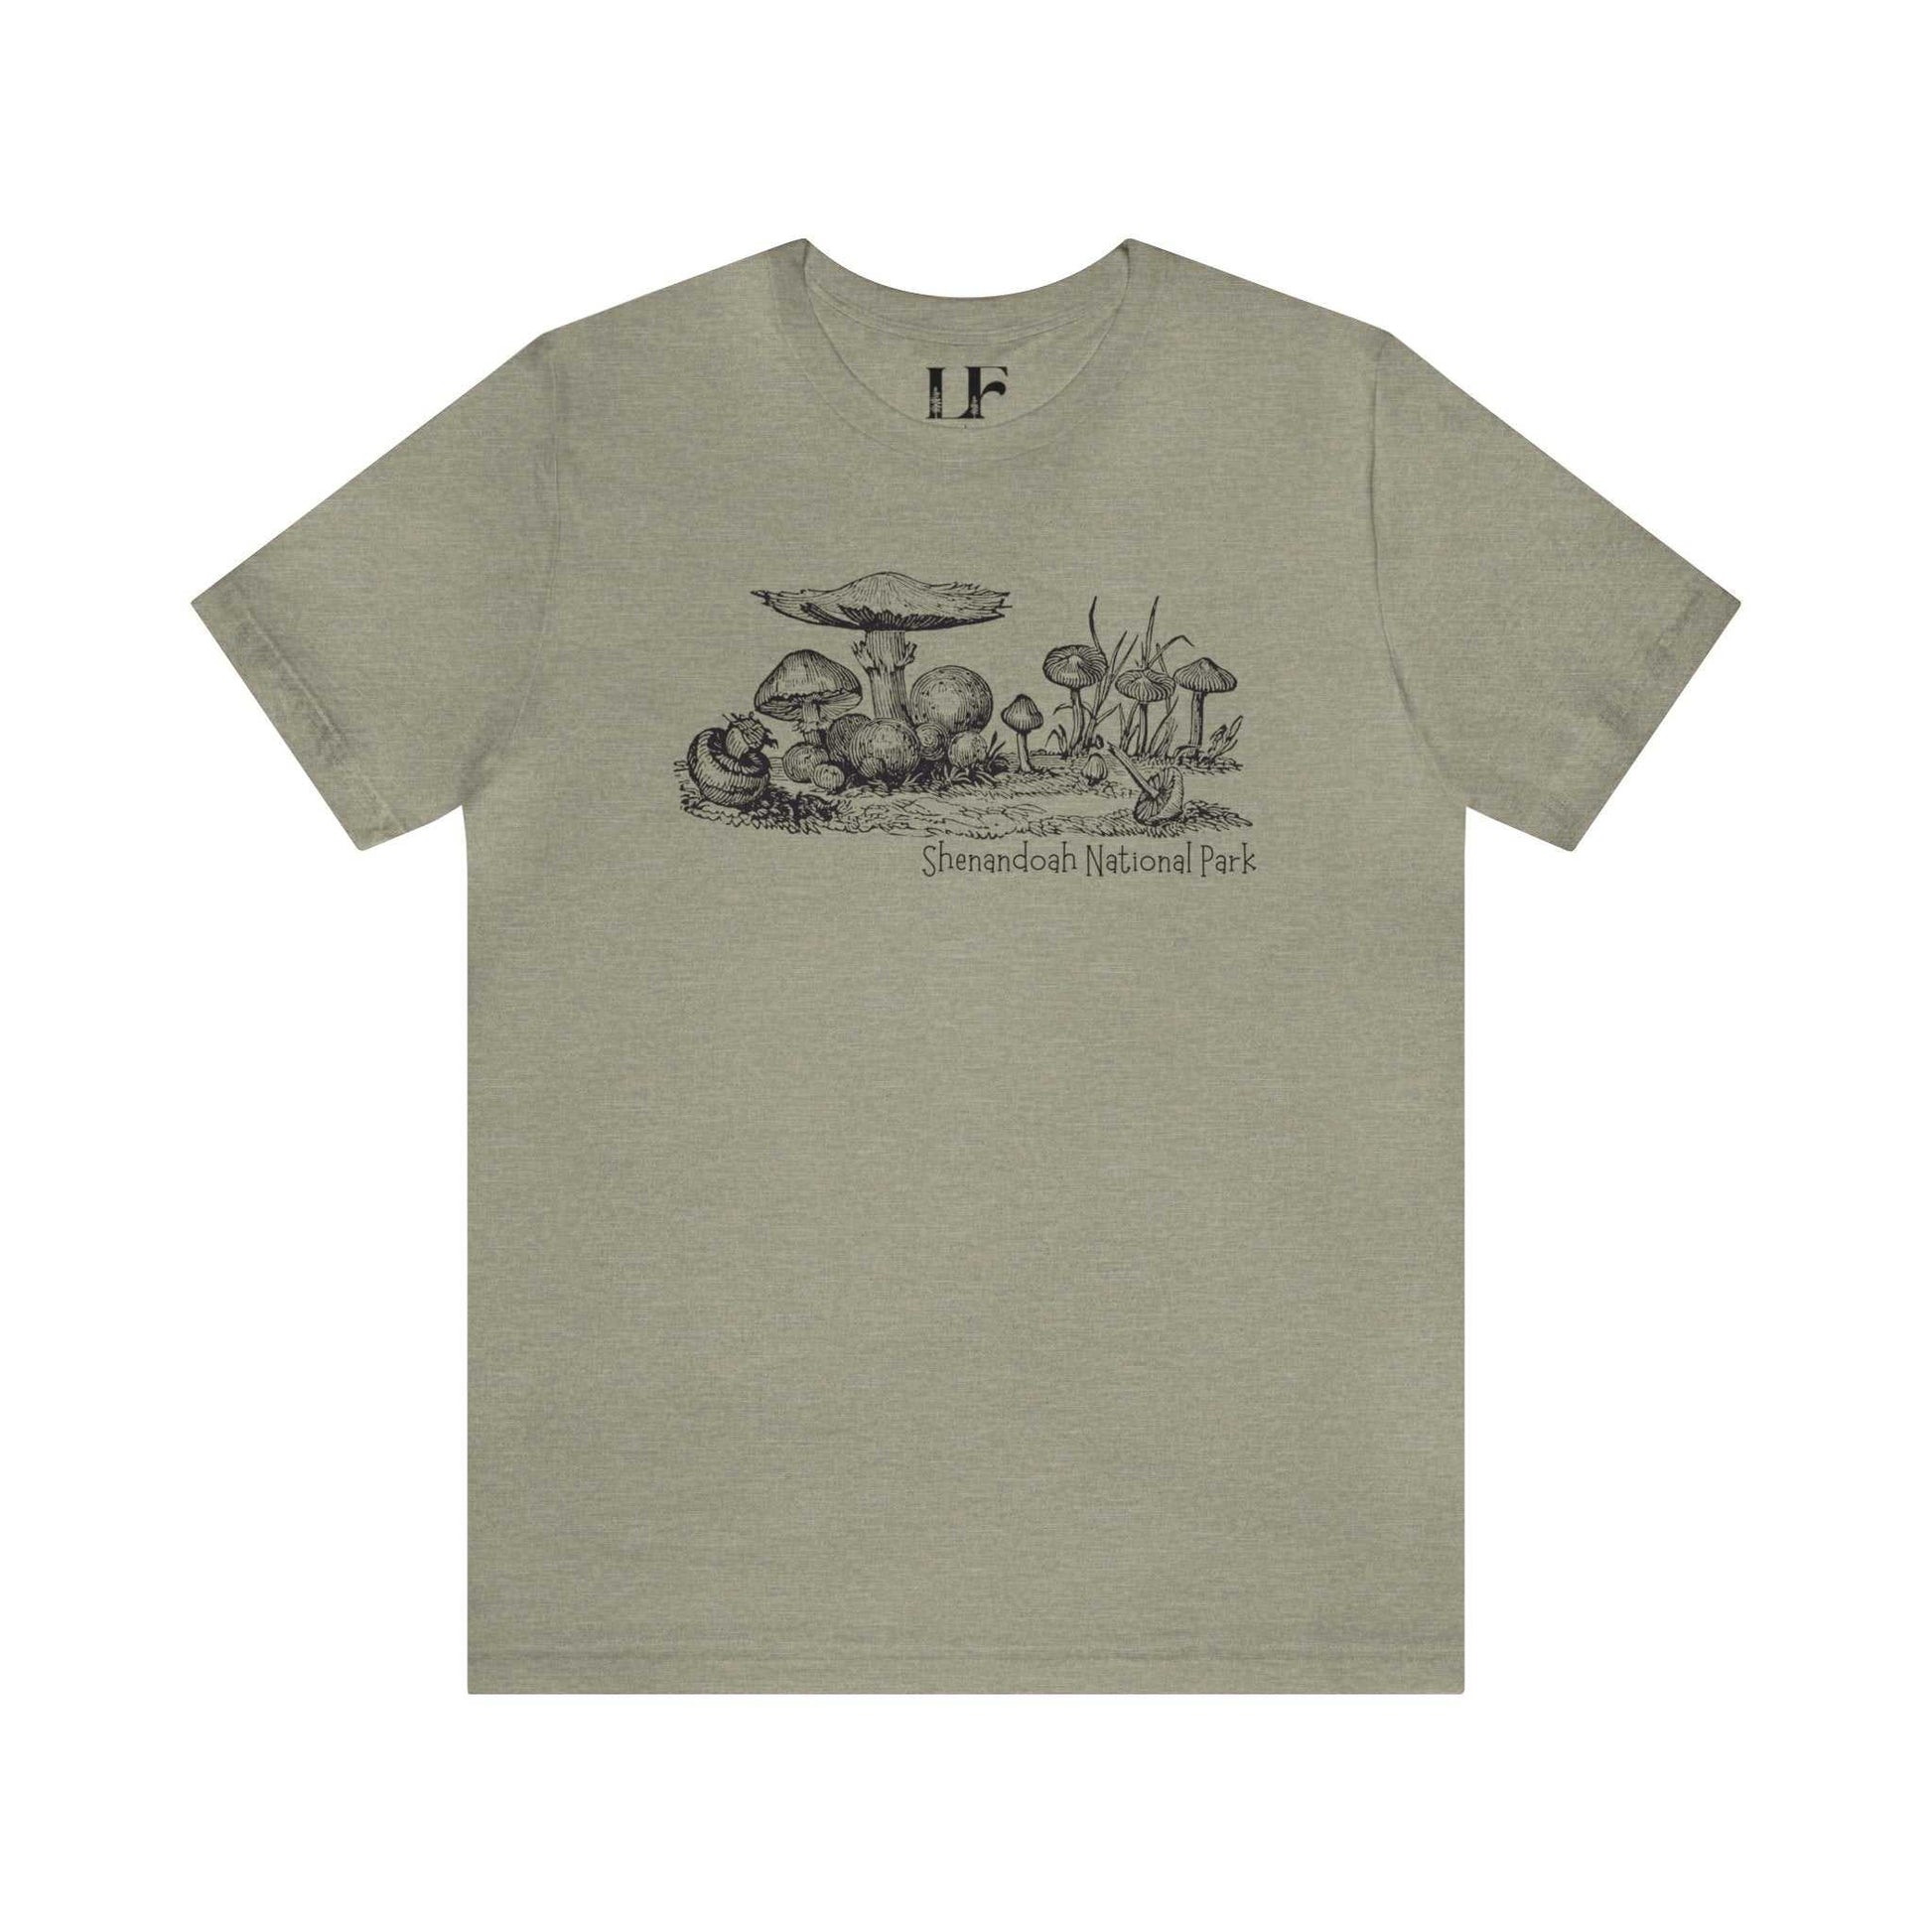 Shenandoah National Park Mushroom ShirtBring the beauty of Shenandoah National Park into your wardrobe with this vintage styled  t-shirt inspired by the magic of this iconic park.
Details:
- 100% lightwei